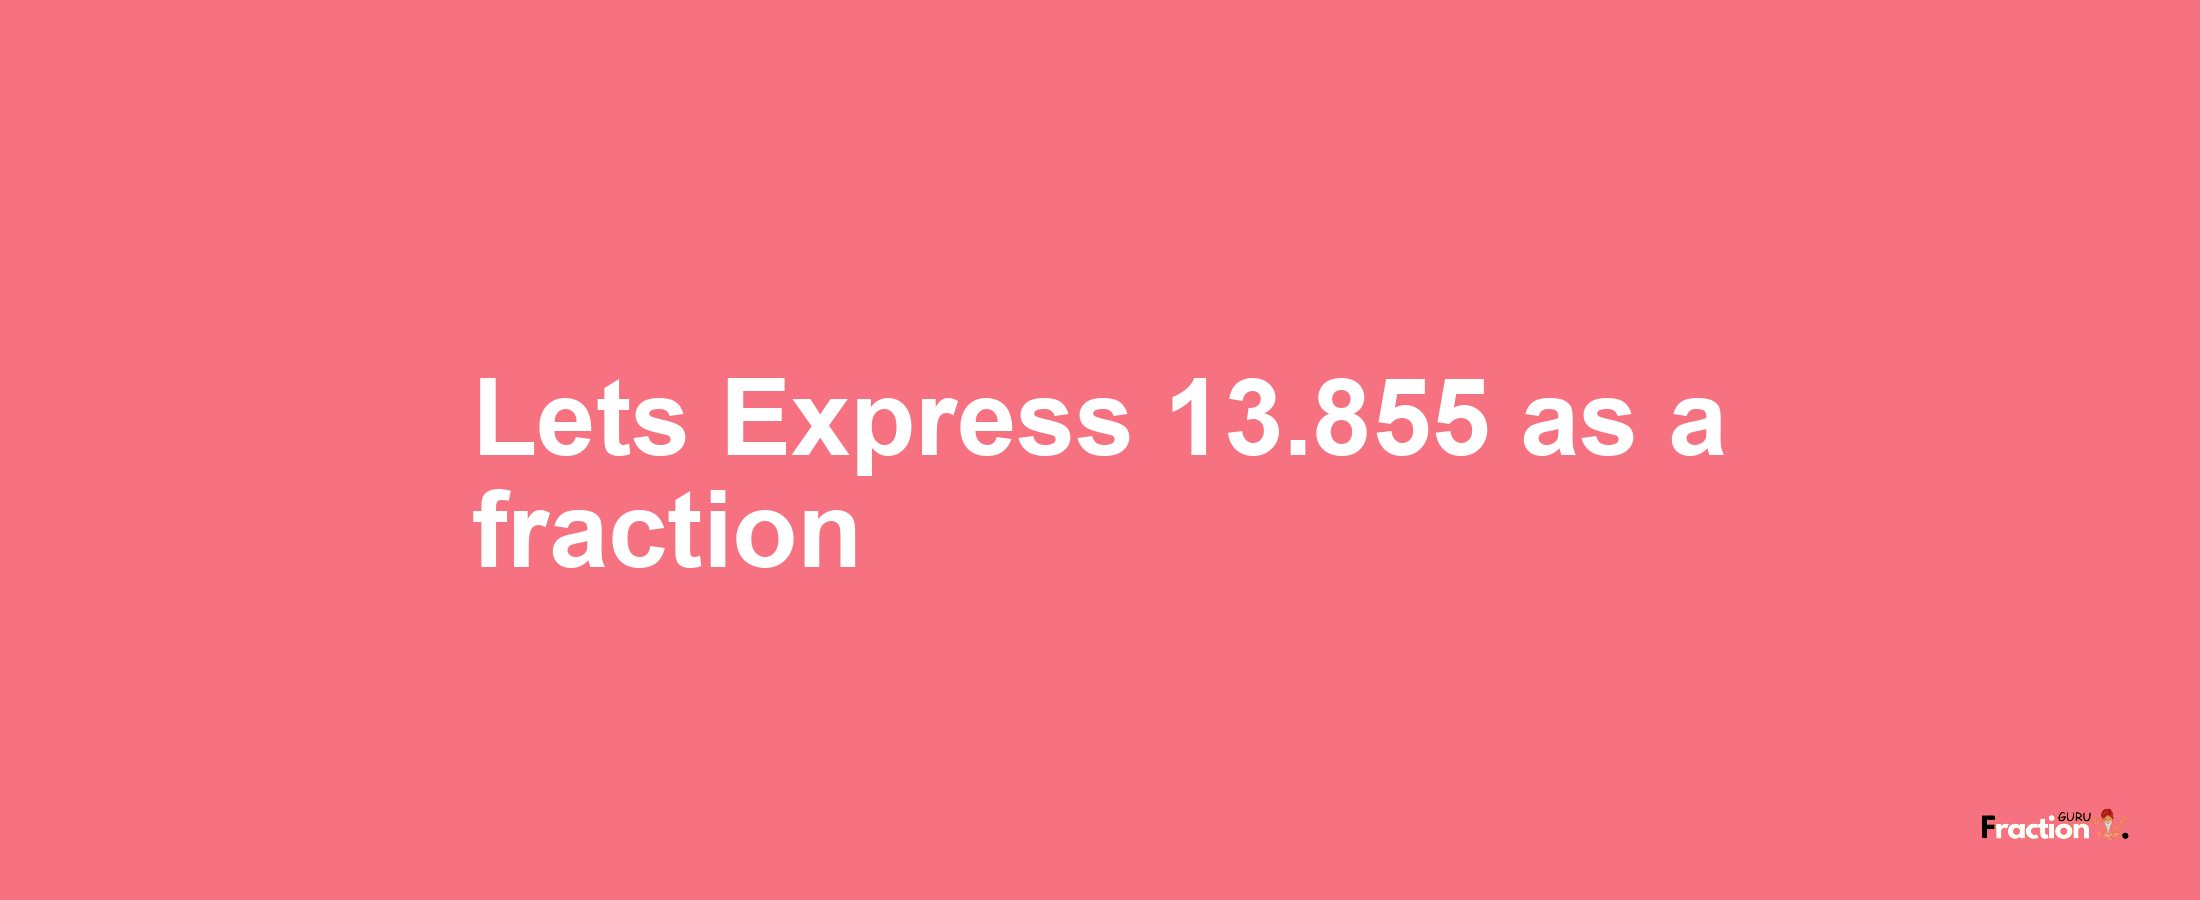 Lets Express 13.855 as afraction